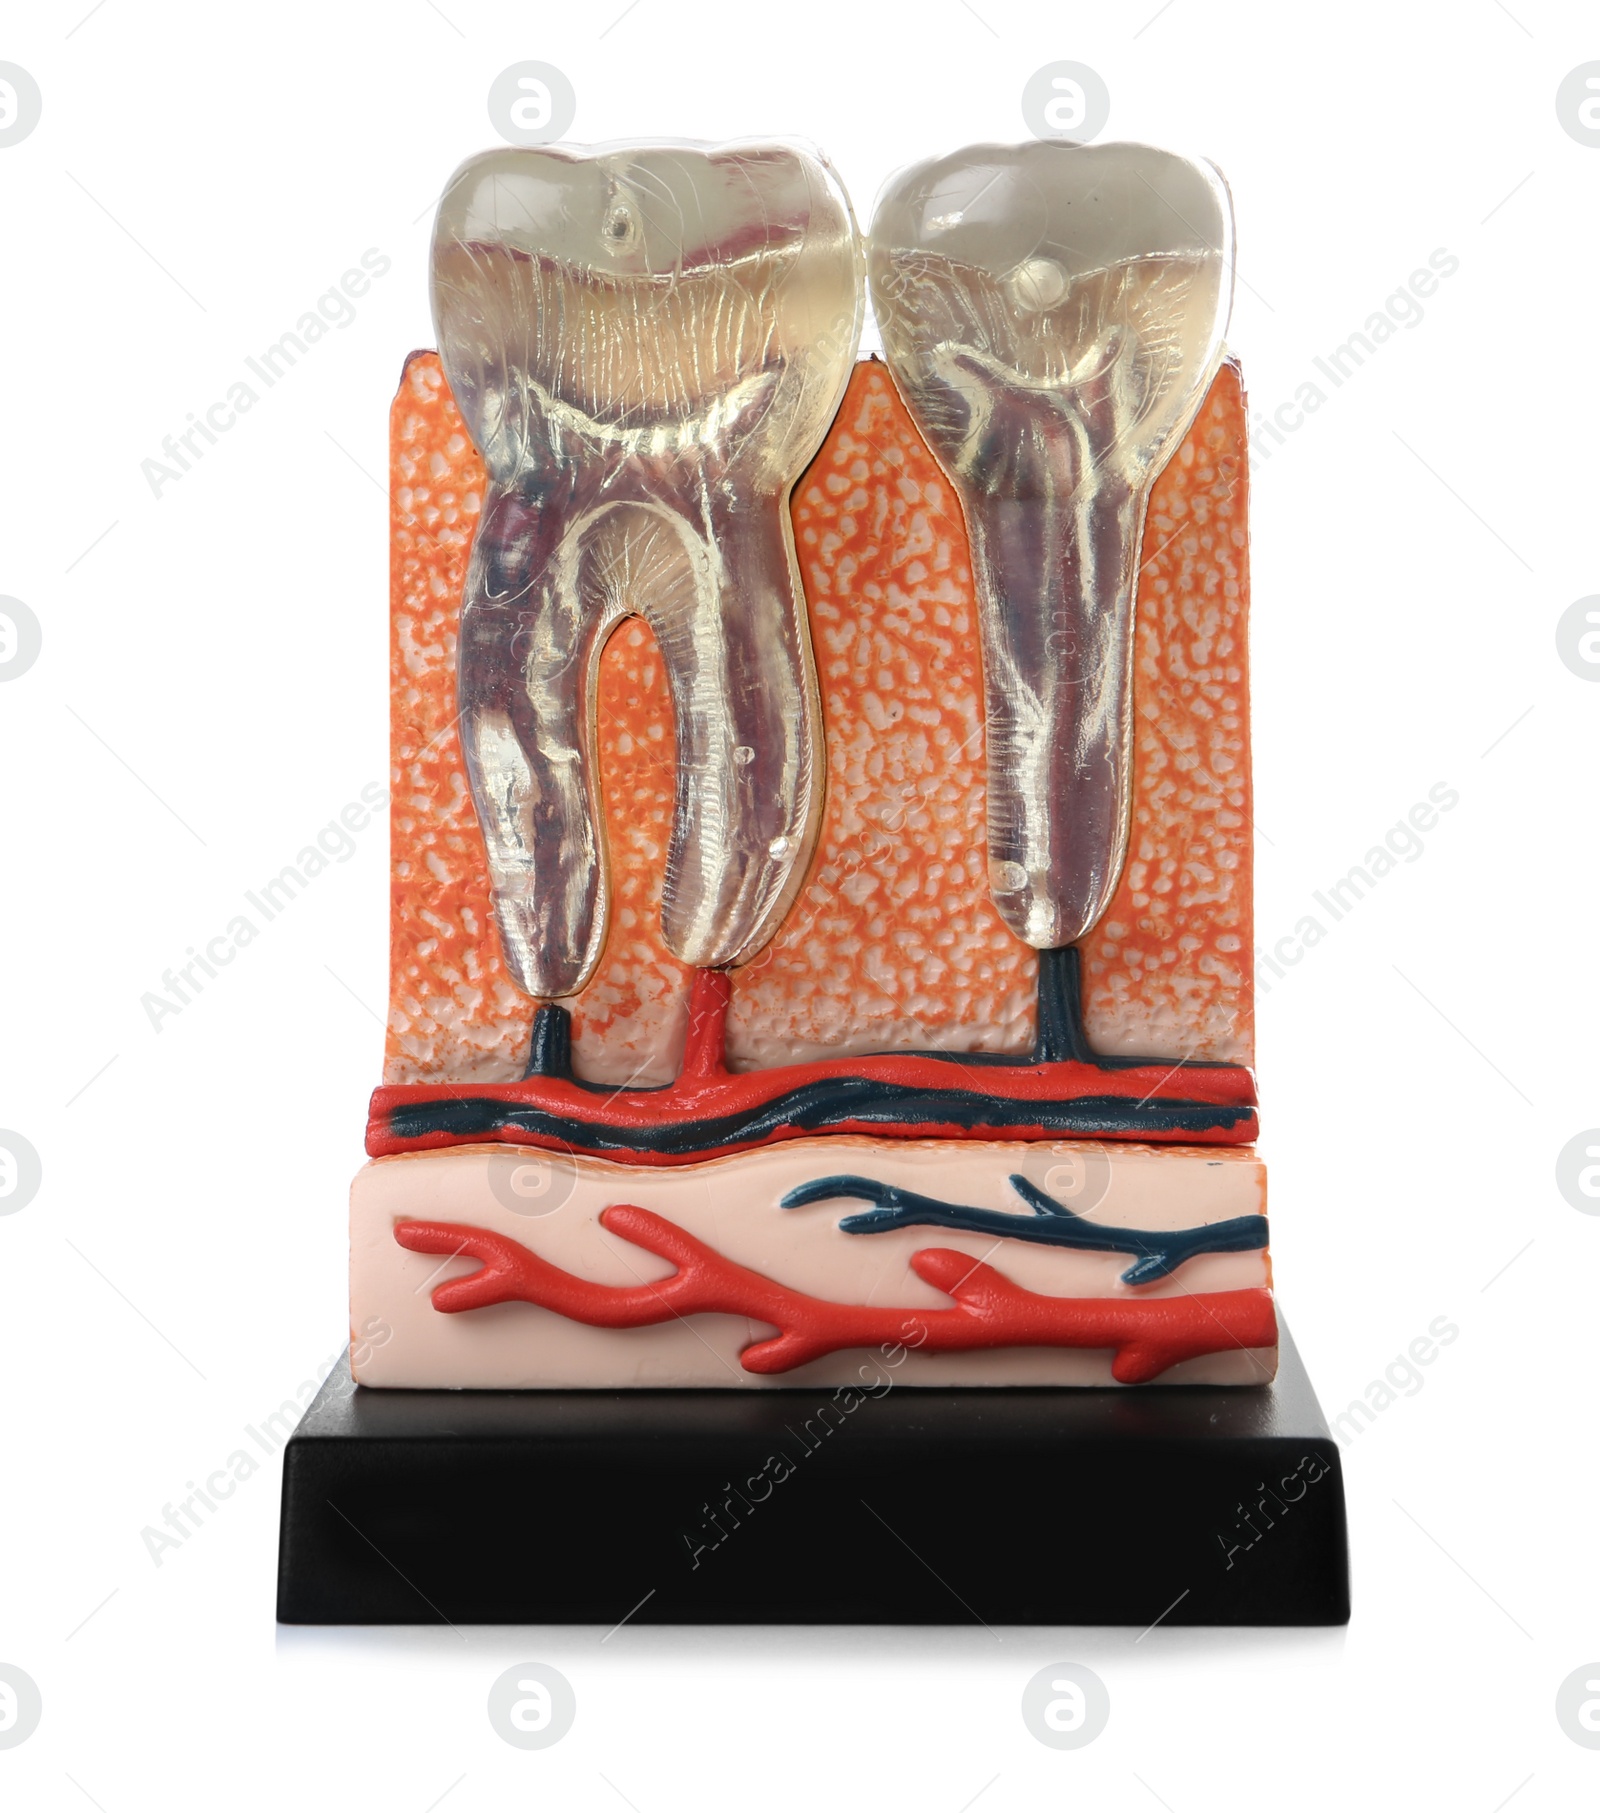 Photo of Educational model of jaw section with teeth on color background